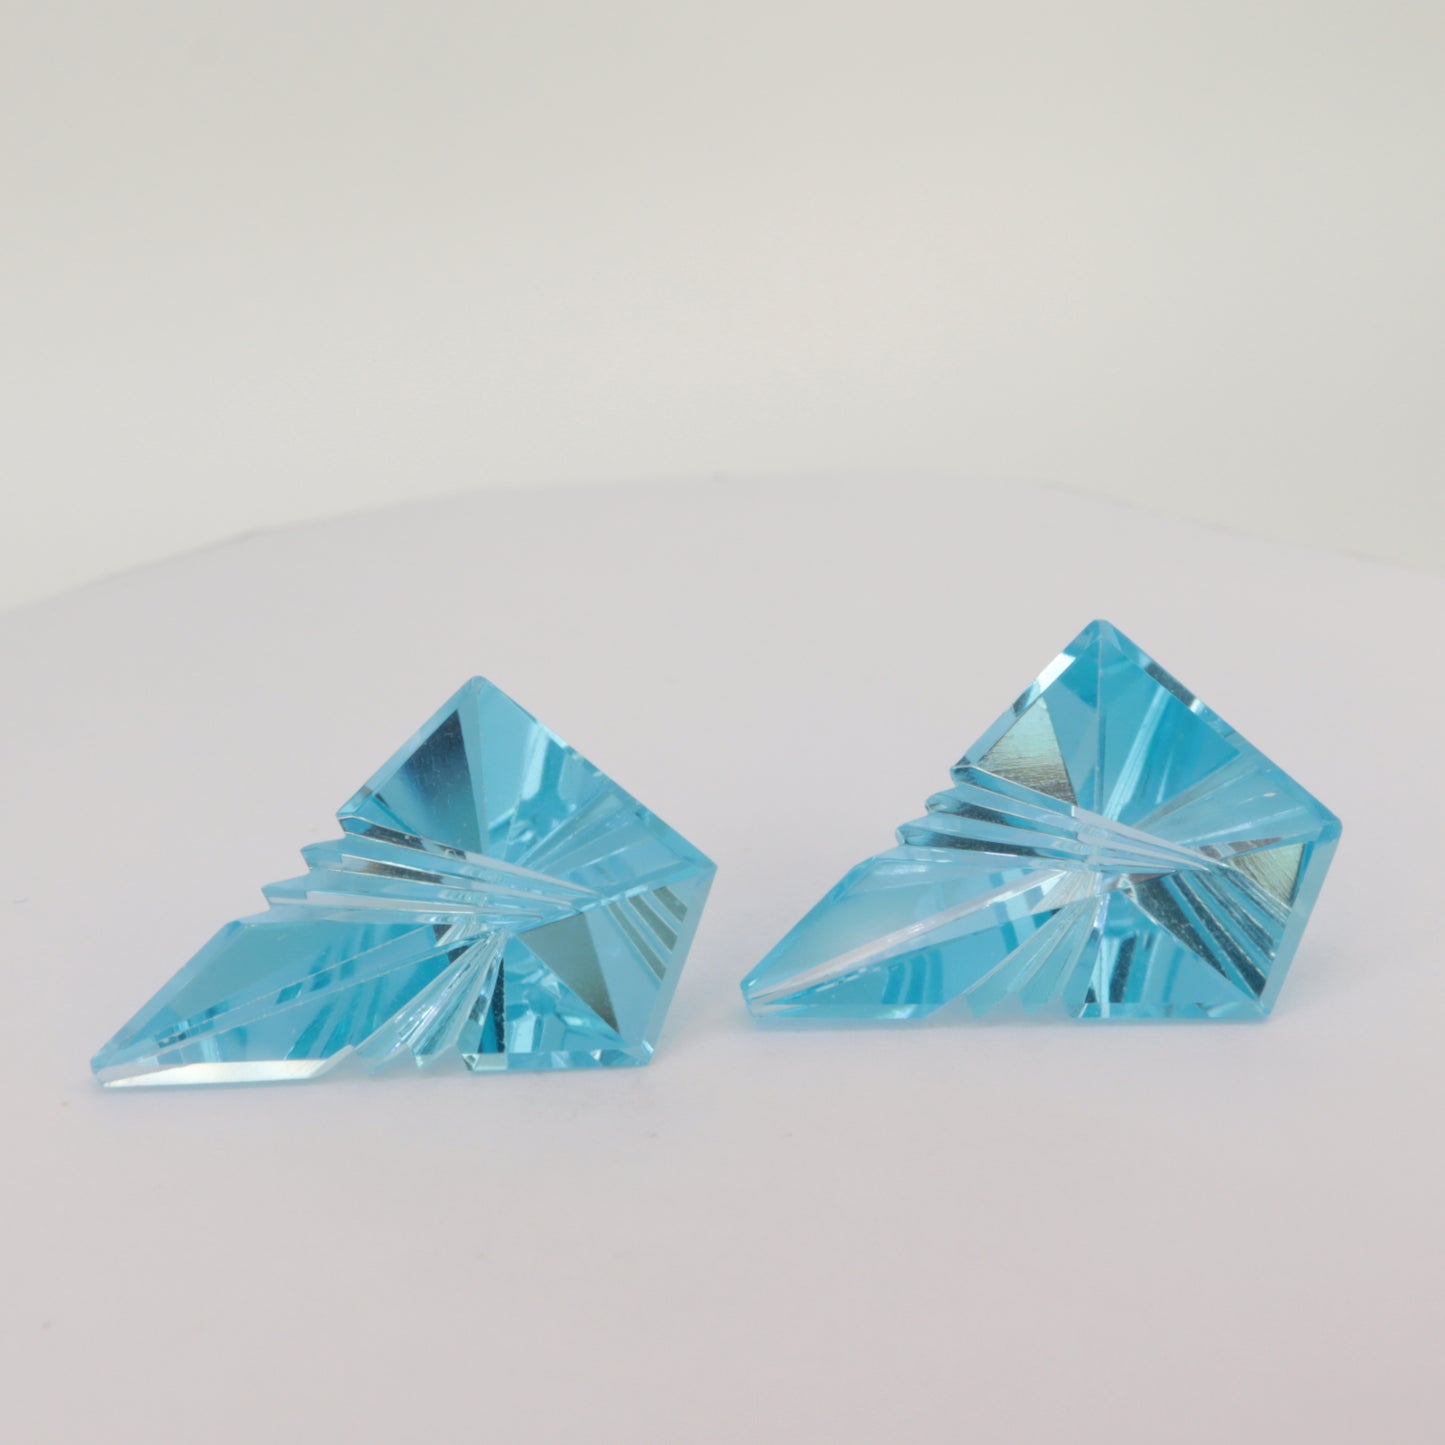 A pair of  Fantasy cut Blue Topaz gemstones (9.1ct and 8.6ct)